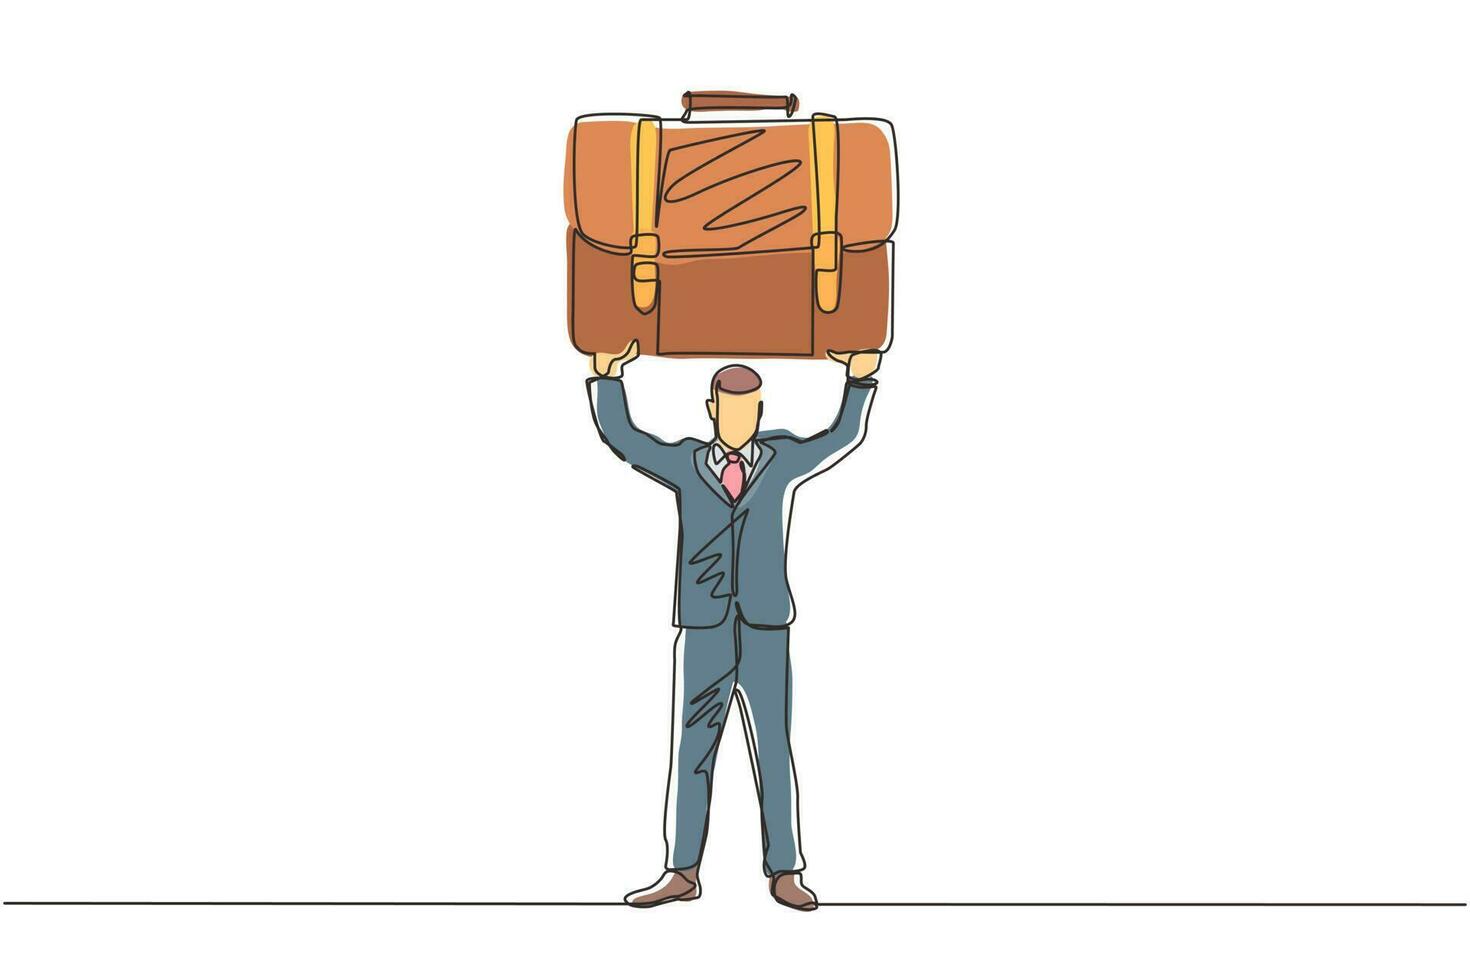 Single continuous line drawing strong manager or businessman raises big briefcase. Business person has achieved success. Rejoices in success. Dynamic one line draw graphic design vector illustration